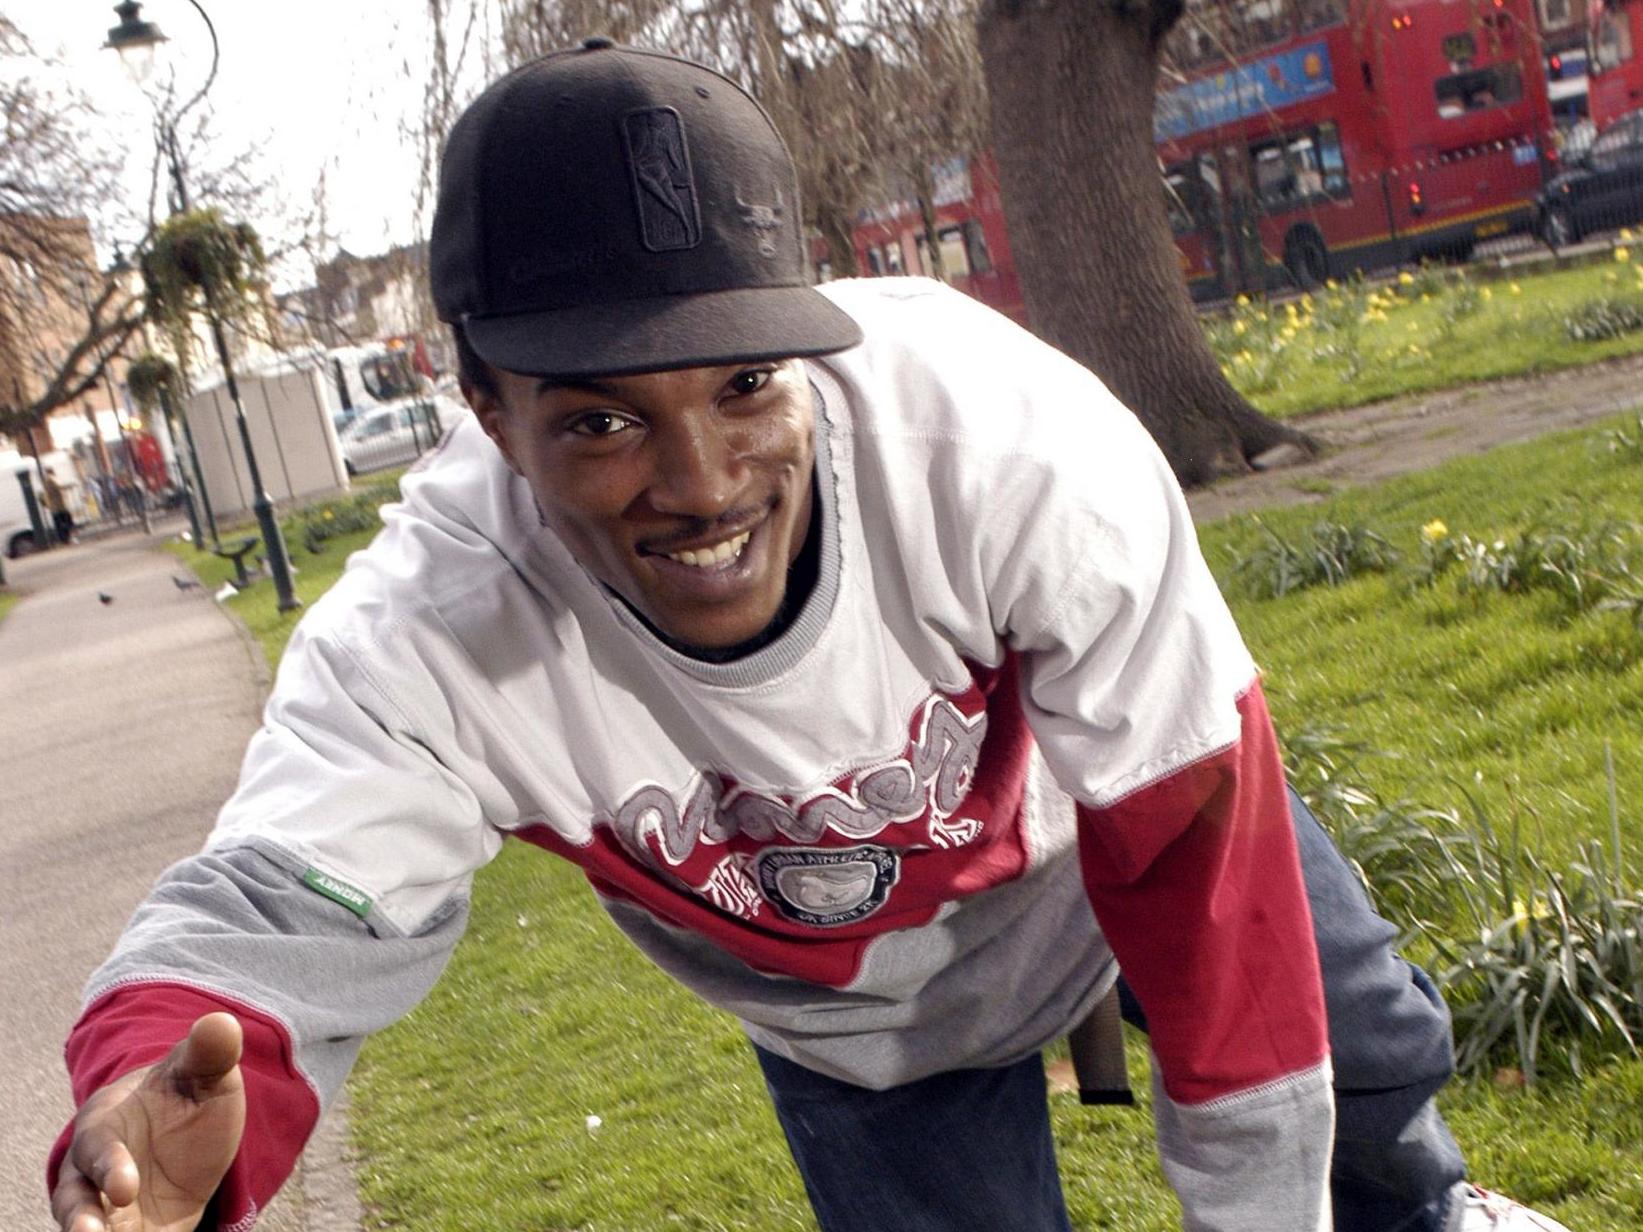 Walters pictured in his So Solid Crew days in 2005 when he went by the name of Asher D